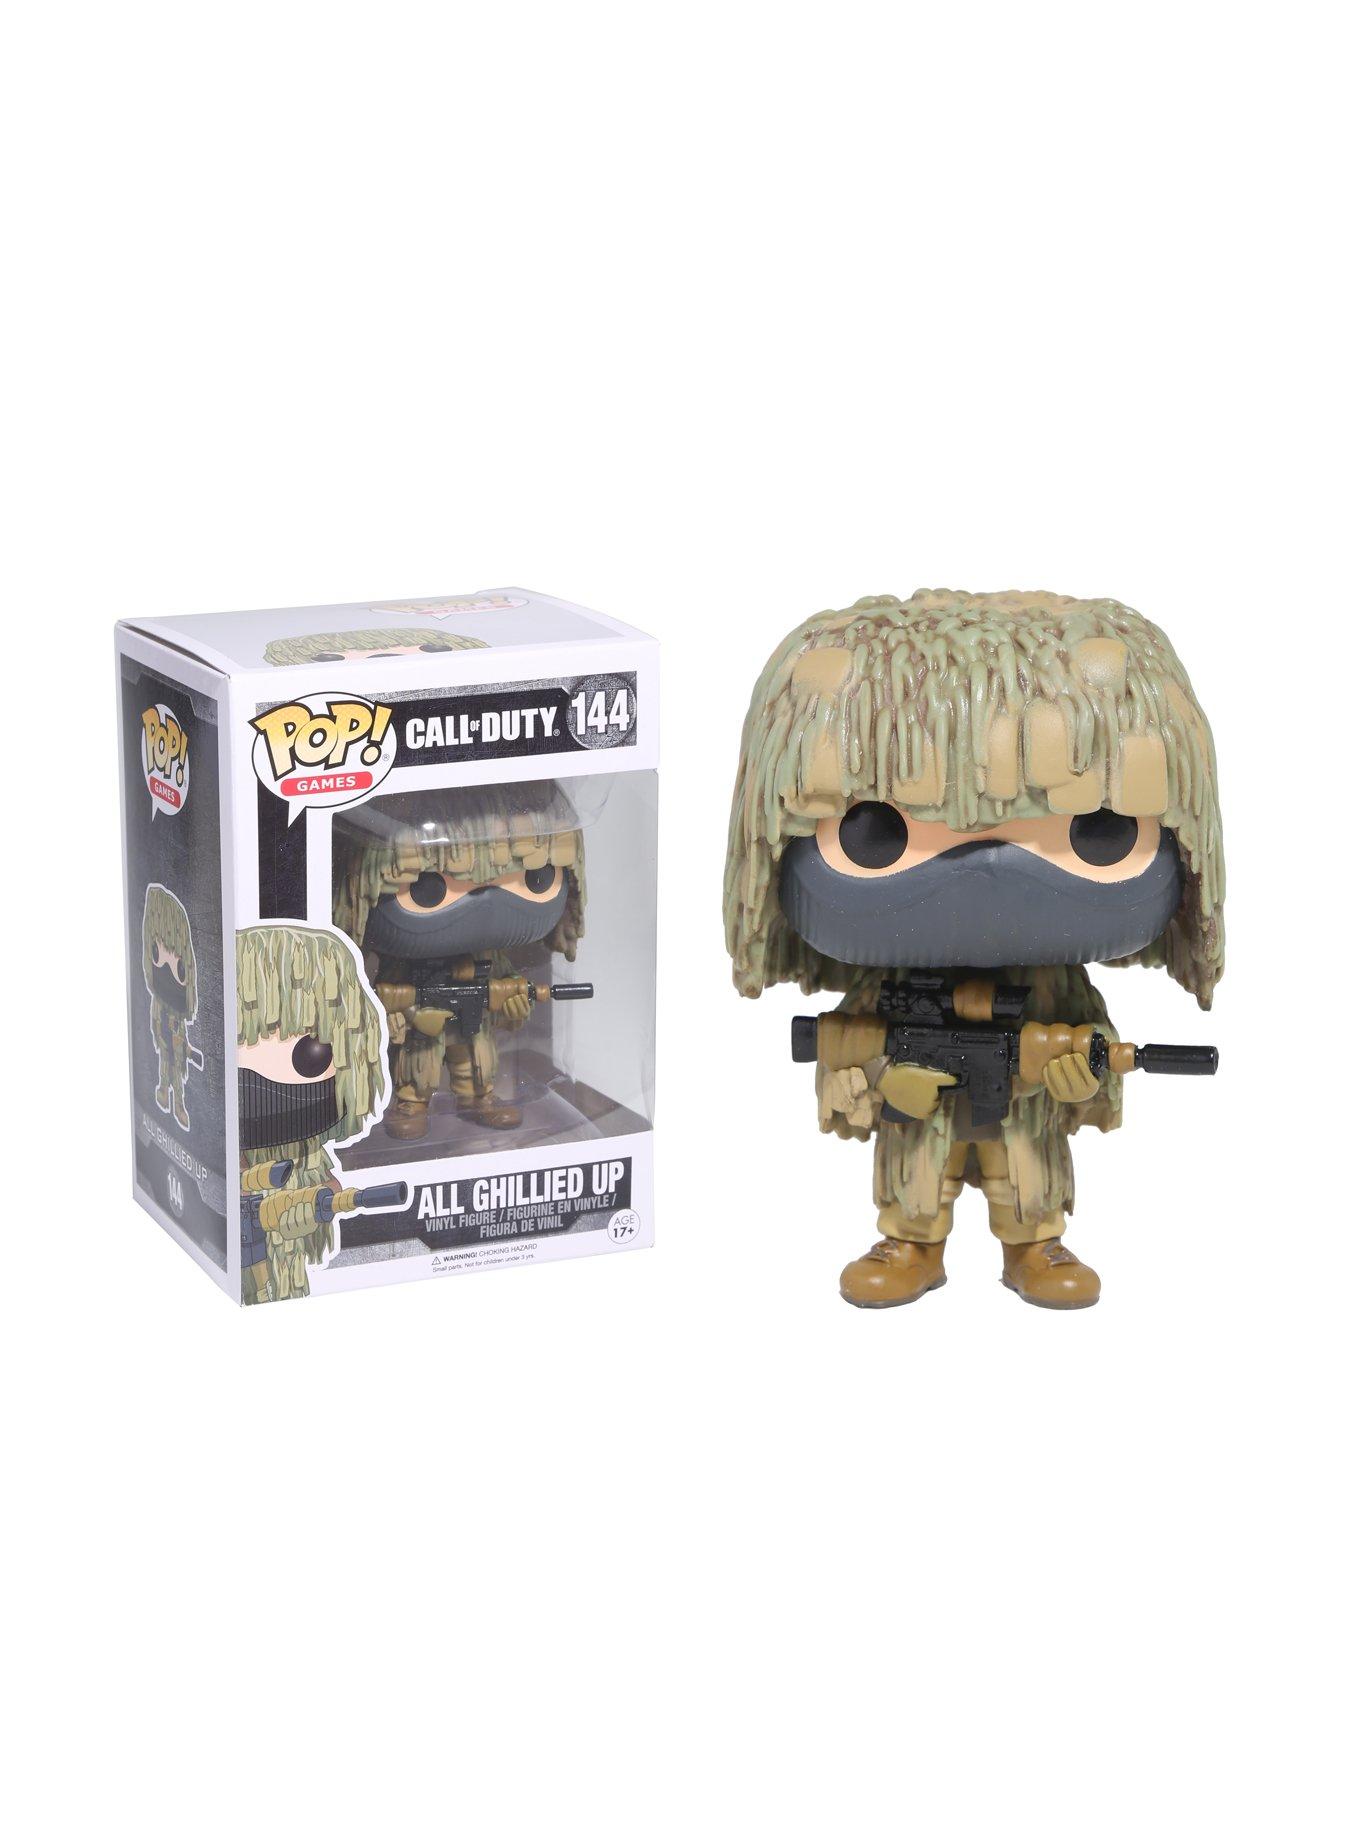 Figurine Funko Pop! Call of Duty : All Ghillied Up - Cdiscount Jeux vidéo